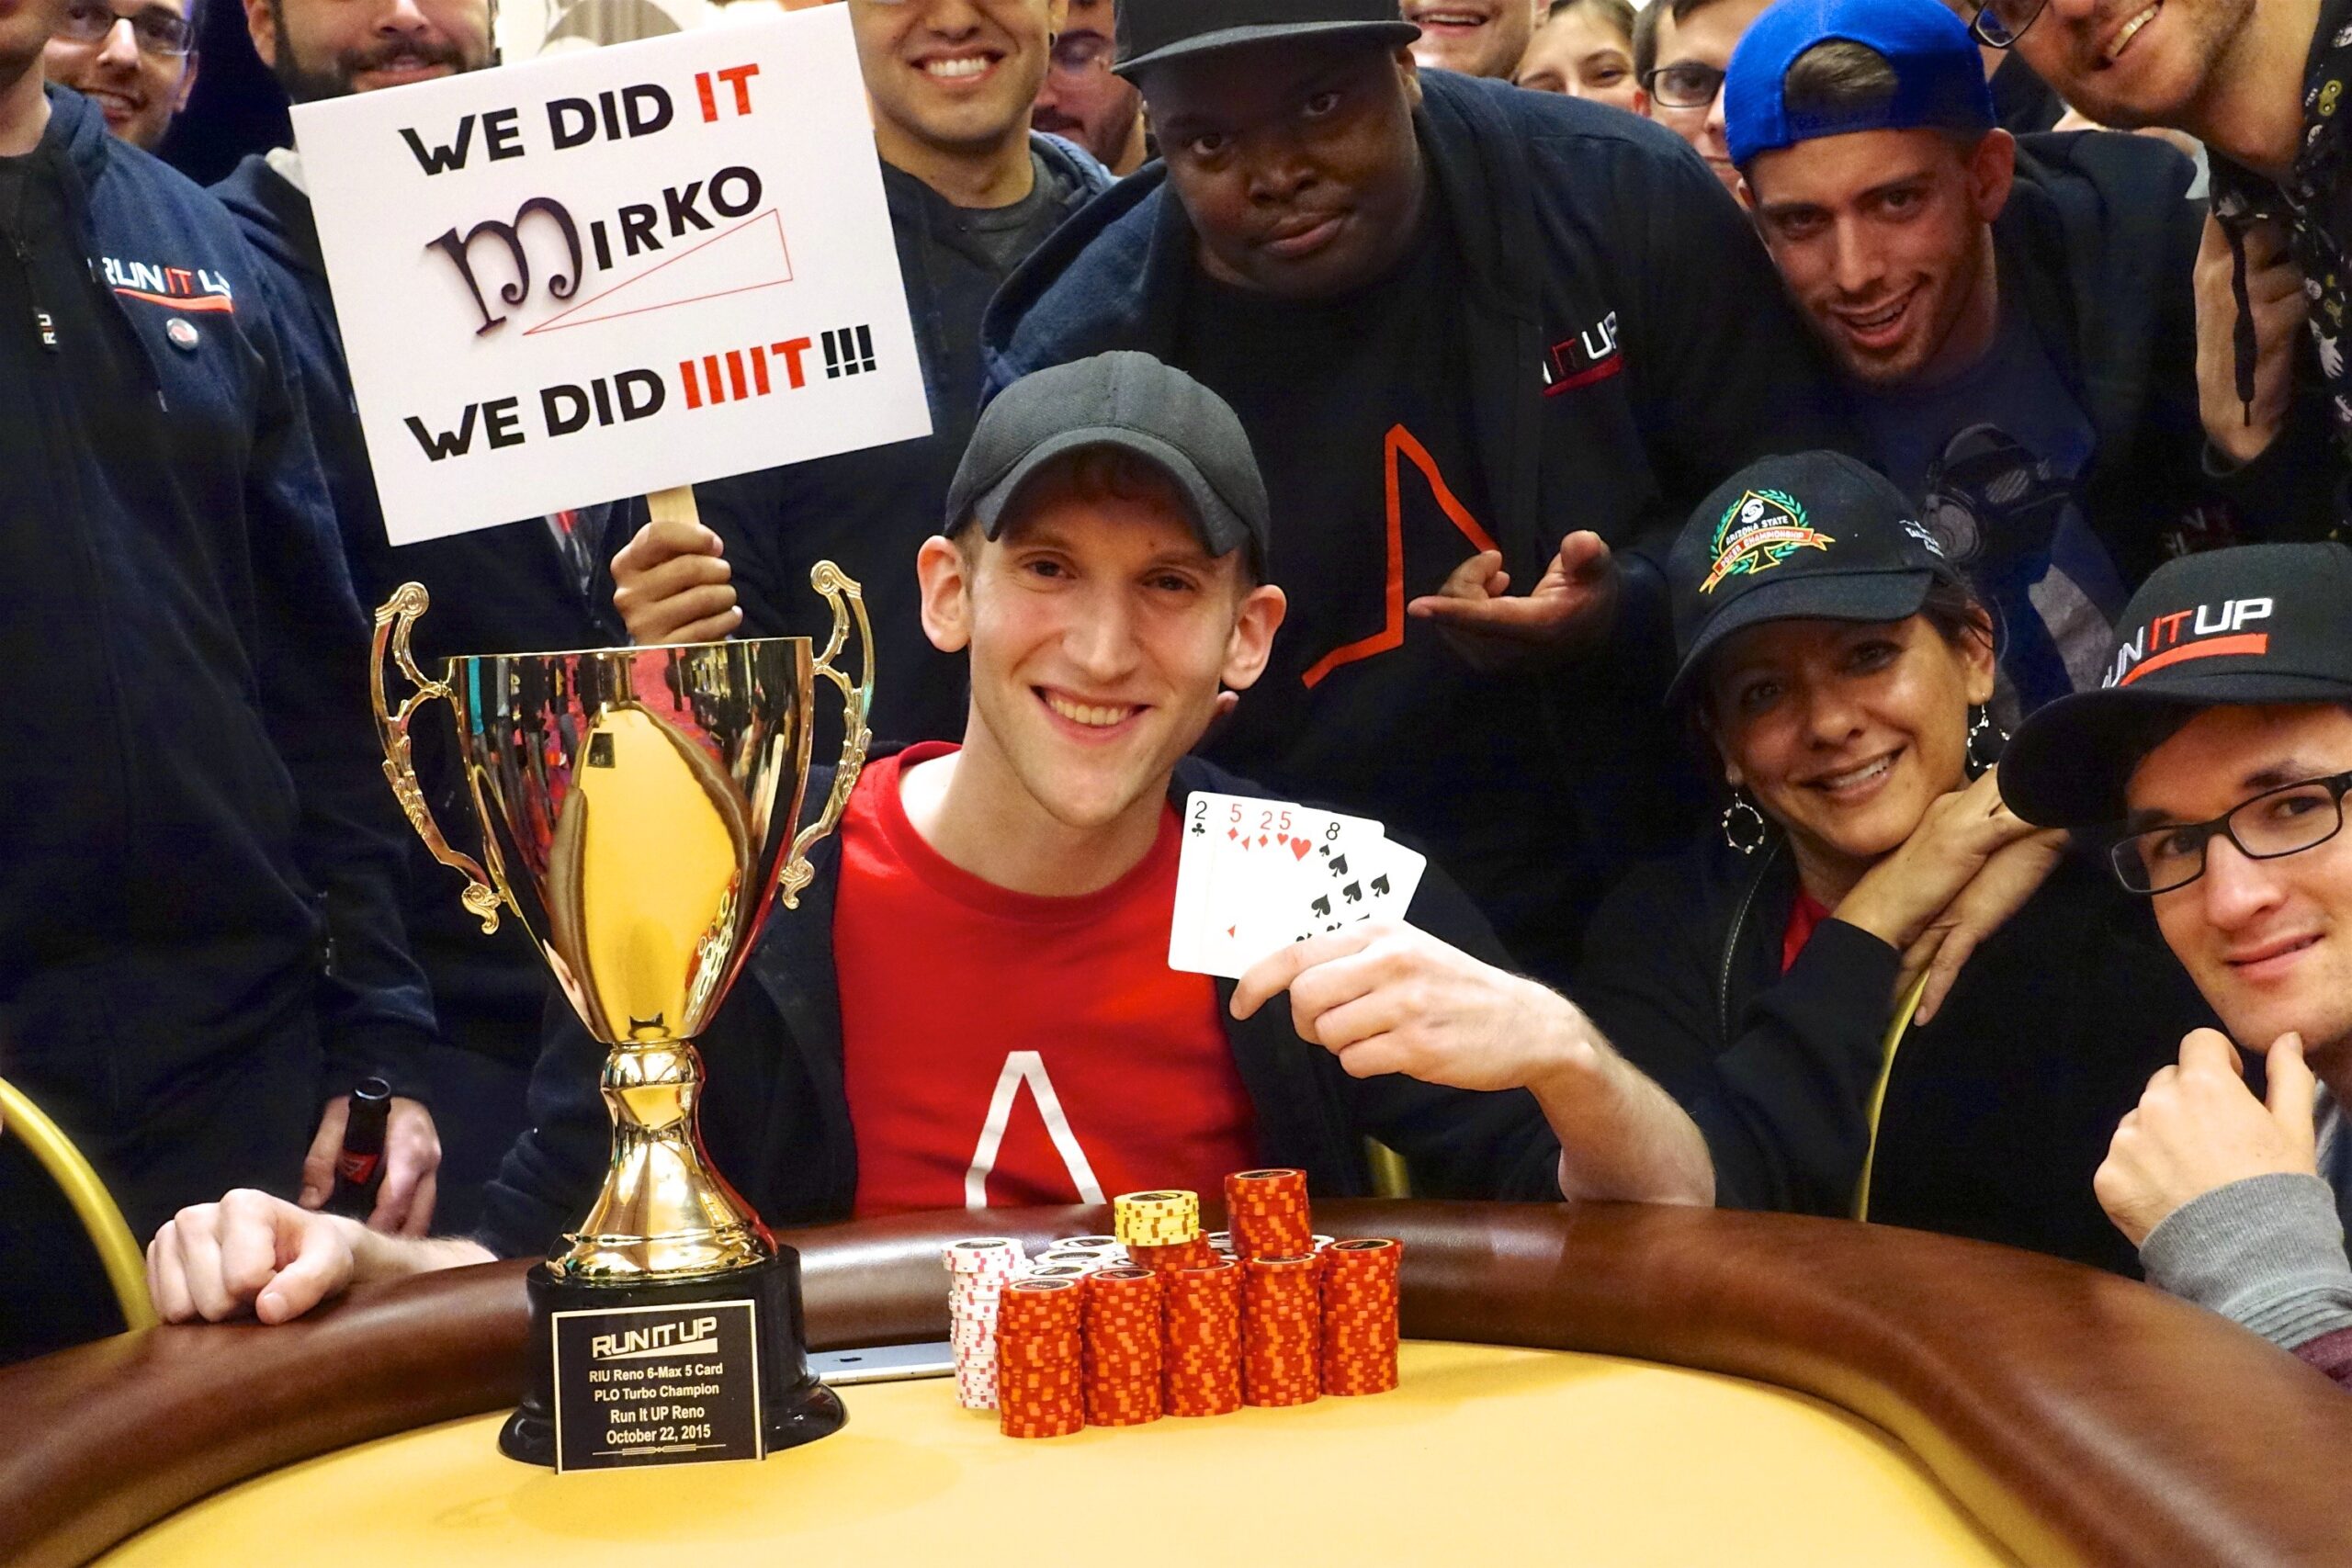 CardsChat Interview: Jason Somerville on Twitch Streaming, Karaoke, and Upcoming ‘Run It Up Reno’ Event